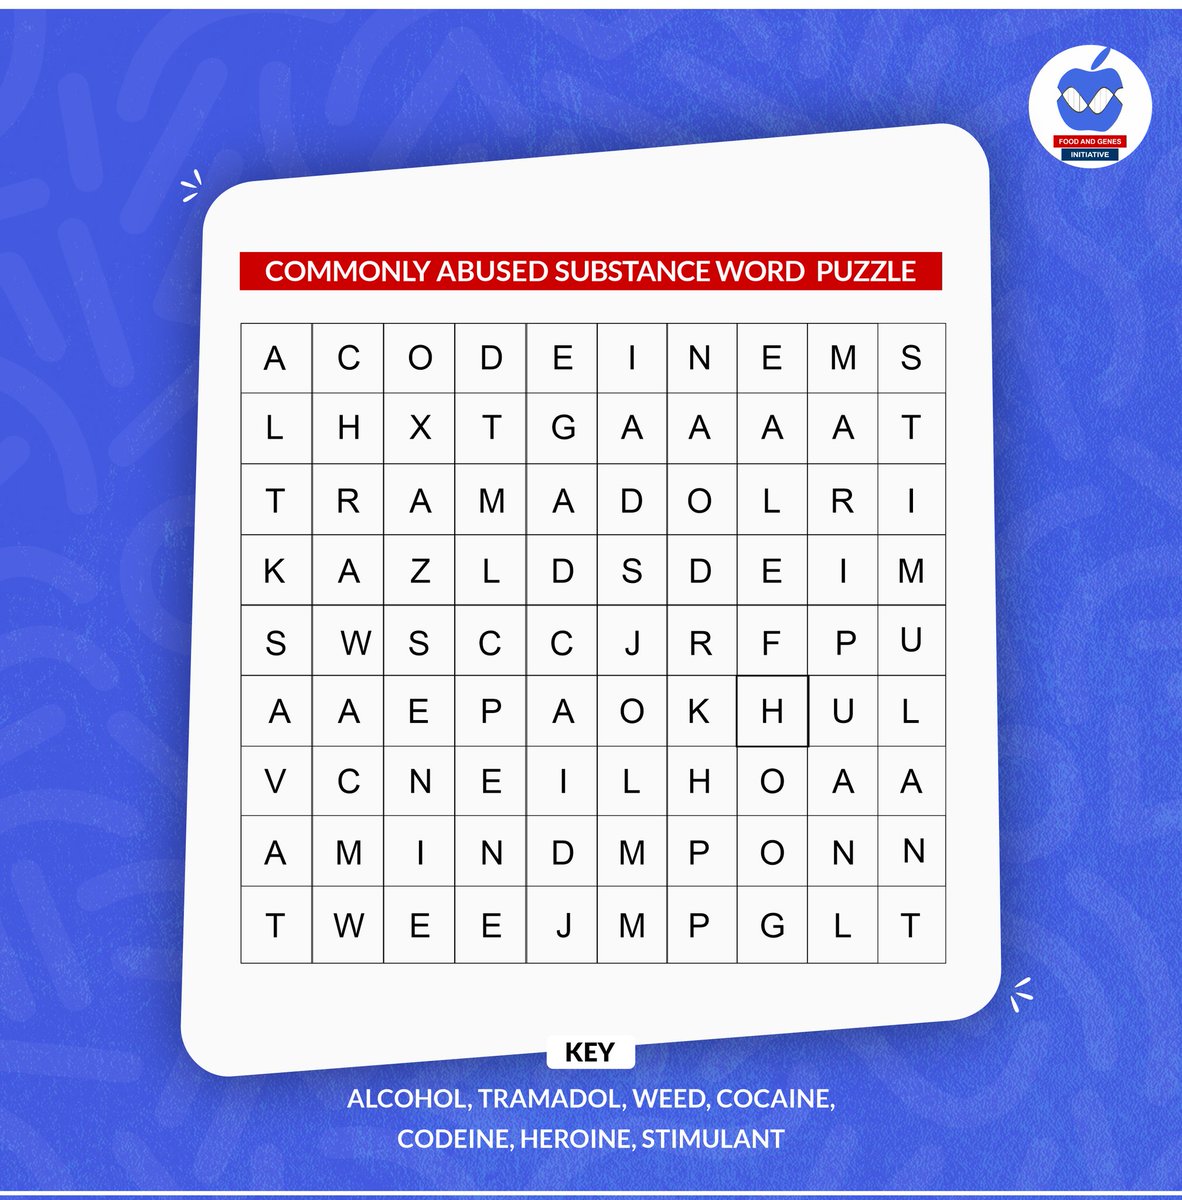 Puzzle time, can you solve it? Drop your answers in the comment section 👇👇👇

#fagieducate 
#puzzletime 
#puzzles
#drugabuse